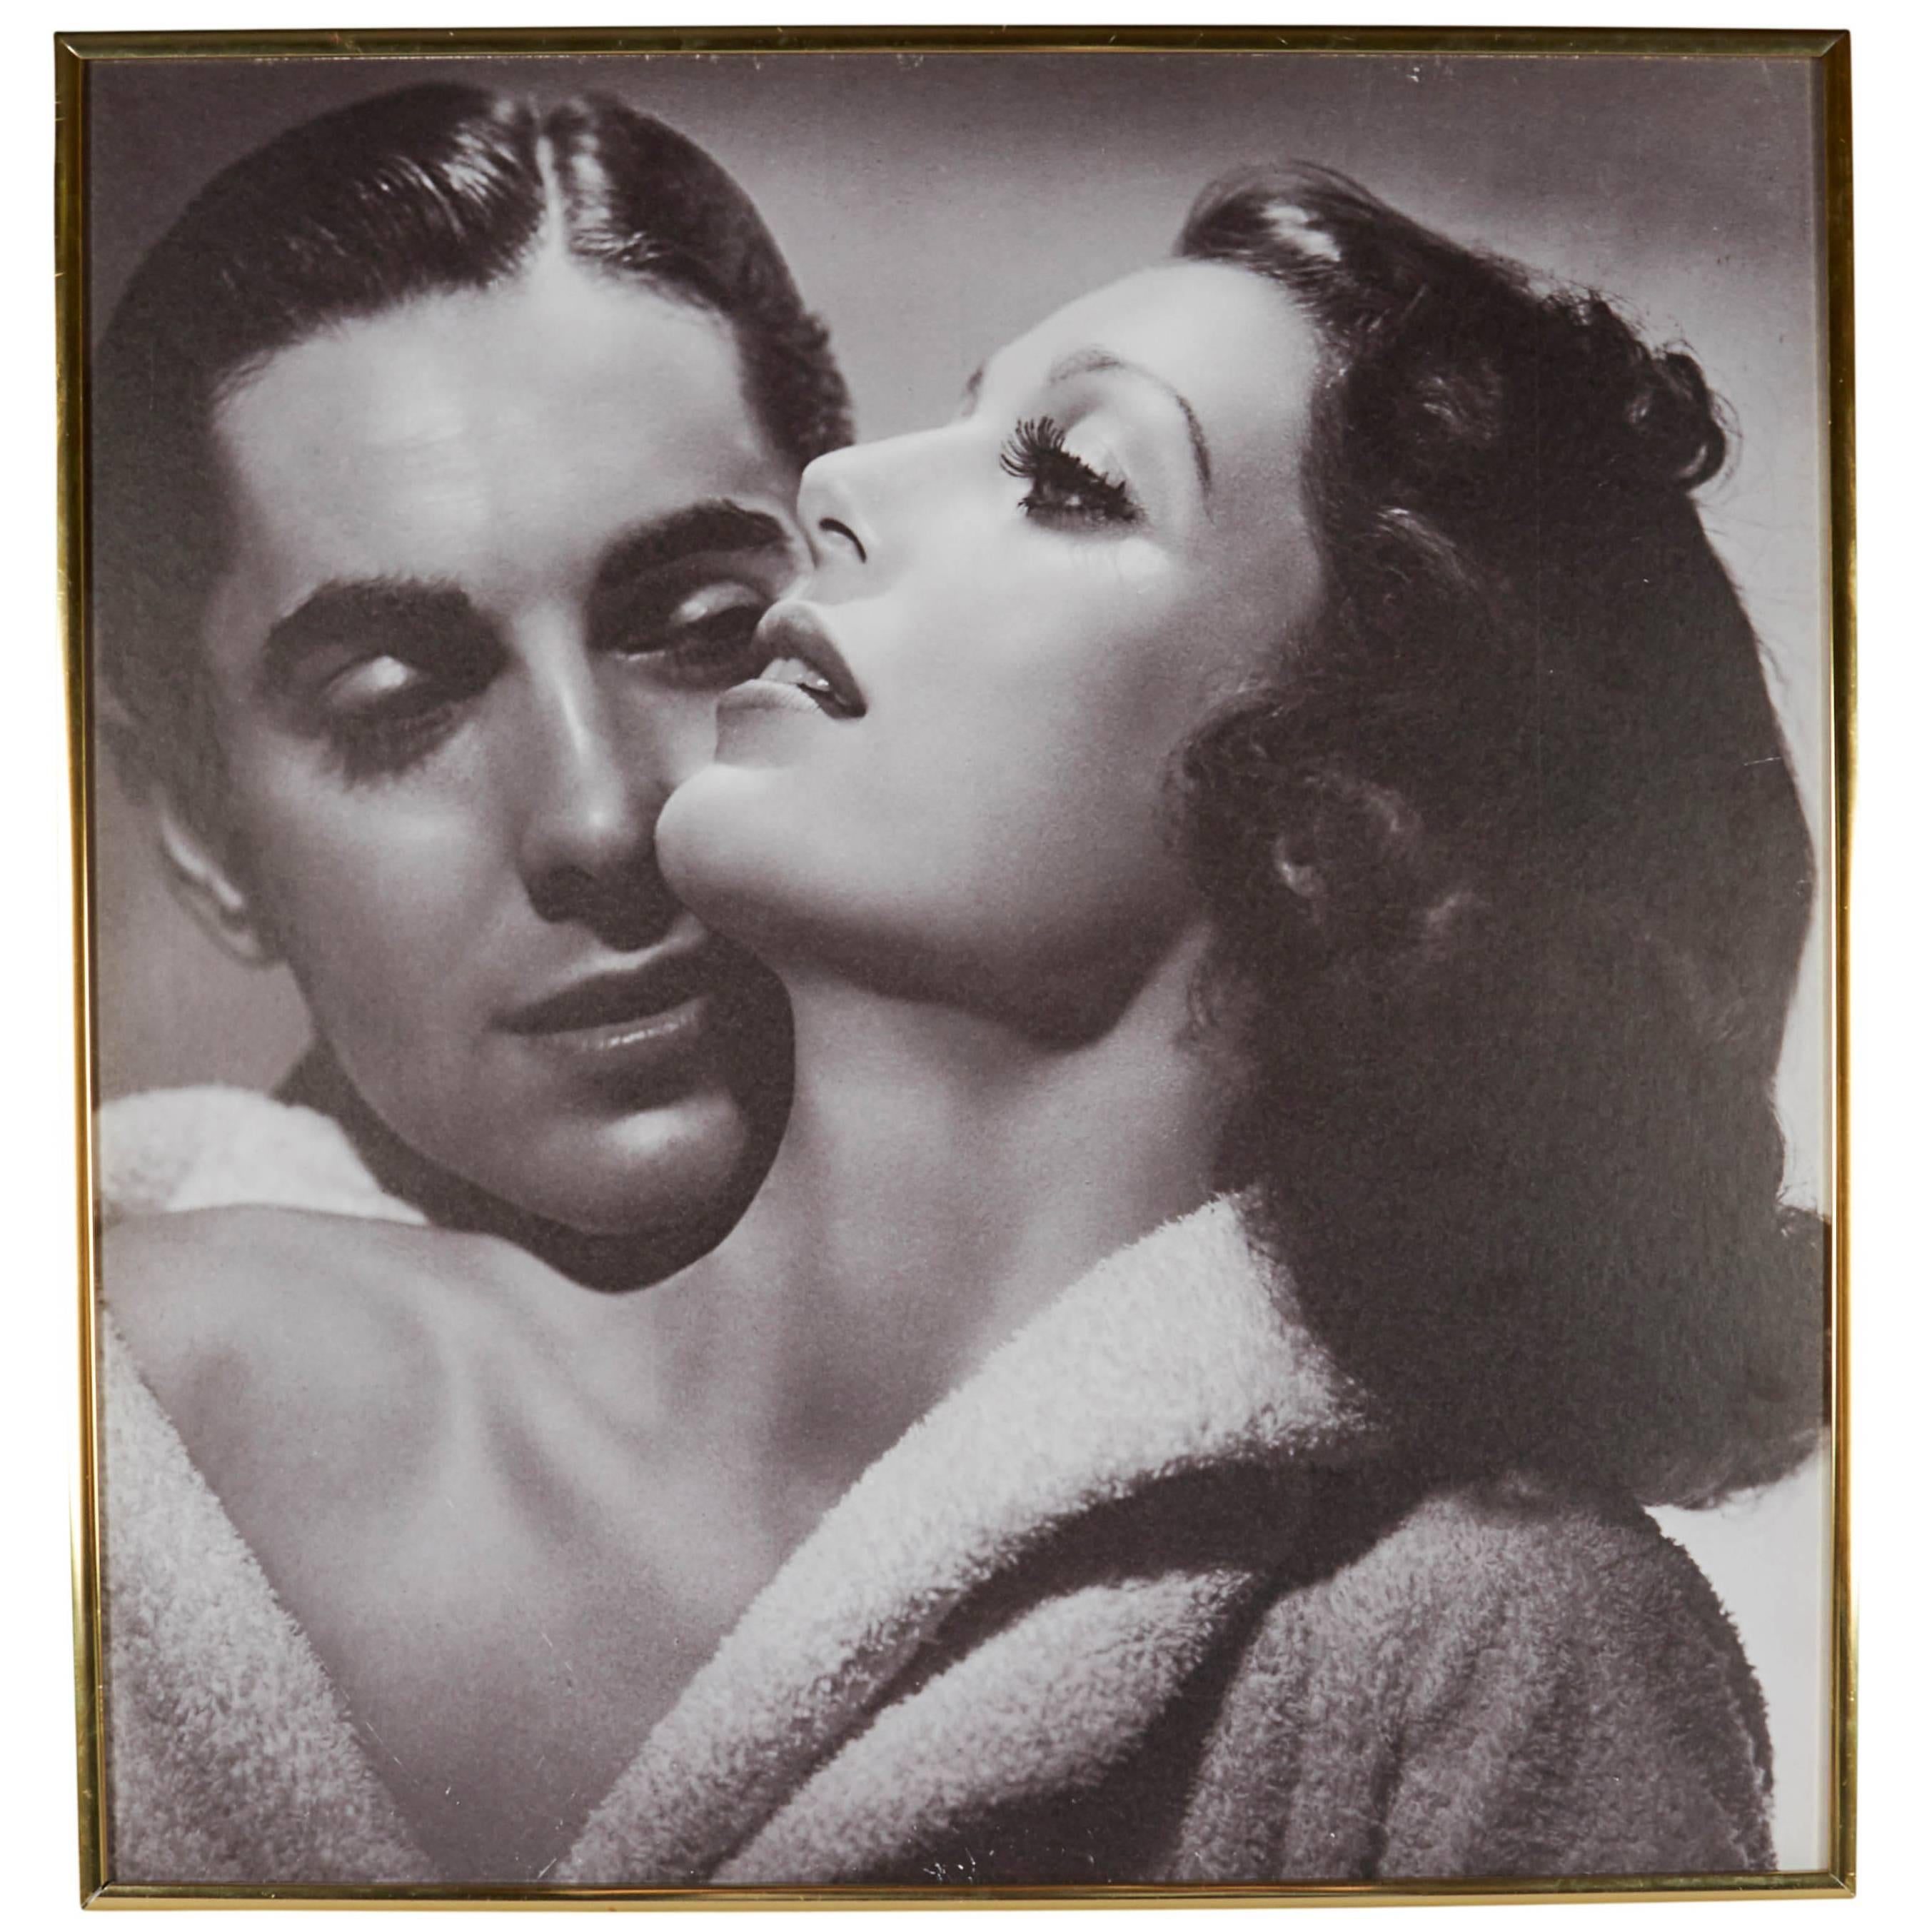 Print of 'Love is News' Film Still, Photographed by George Hurrell